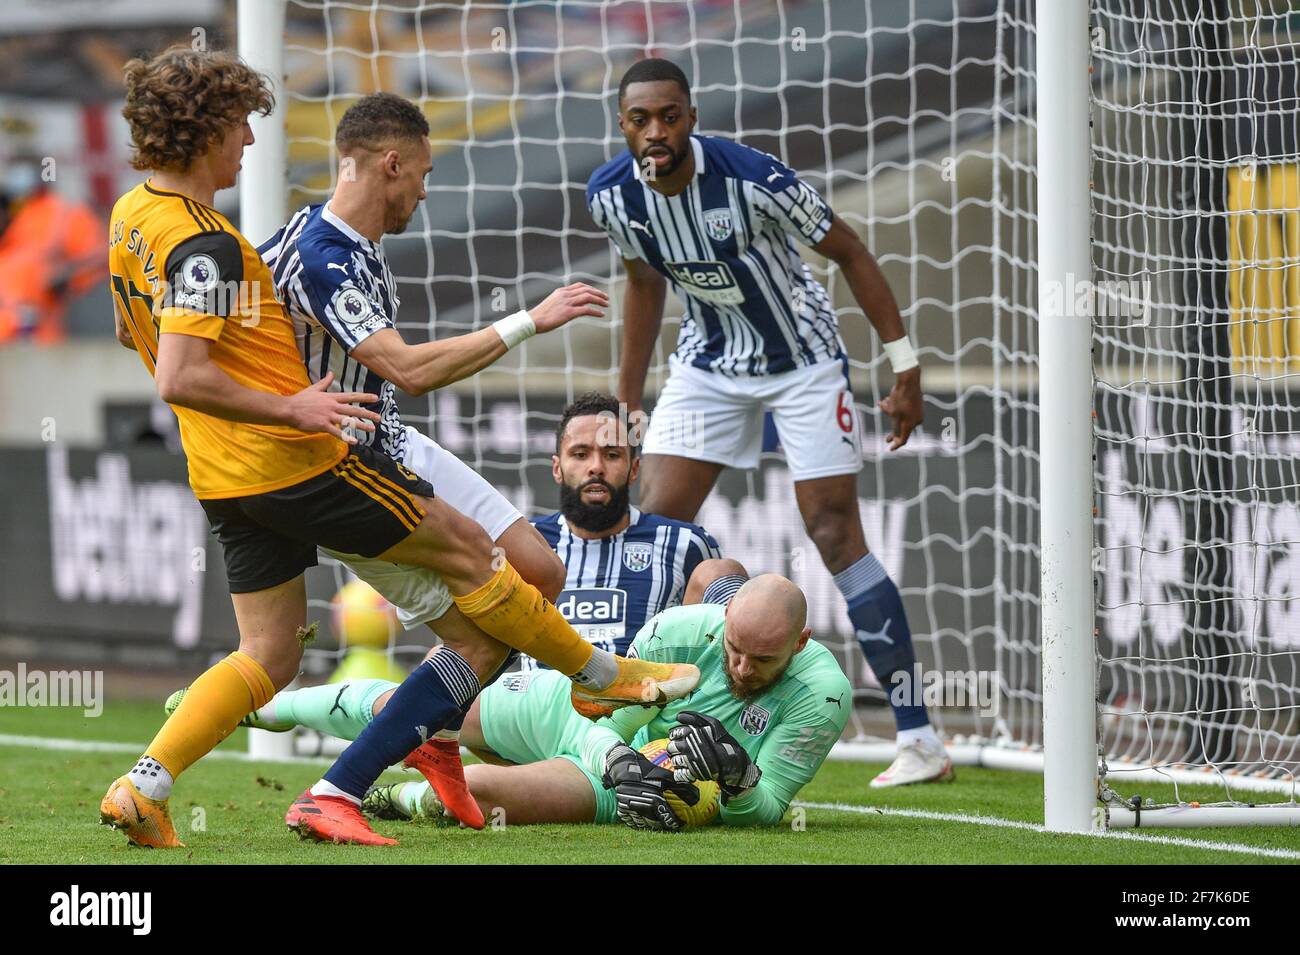 David Button #25 of West Bromwich Albion saves a close range shot from Fabio Silva #17 of Wolverhampton Wanderers Stock Photo